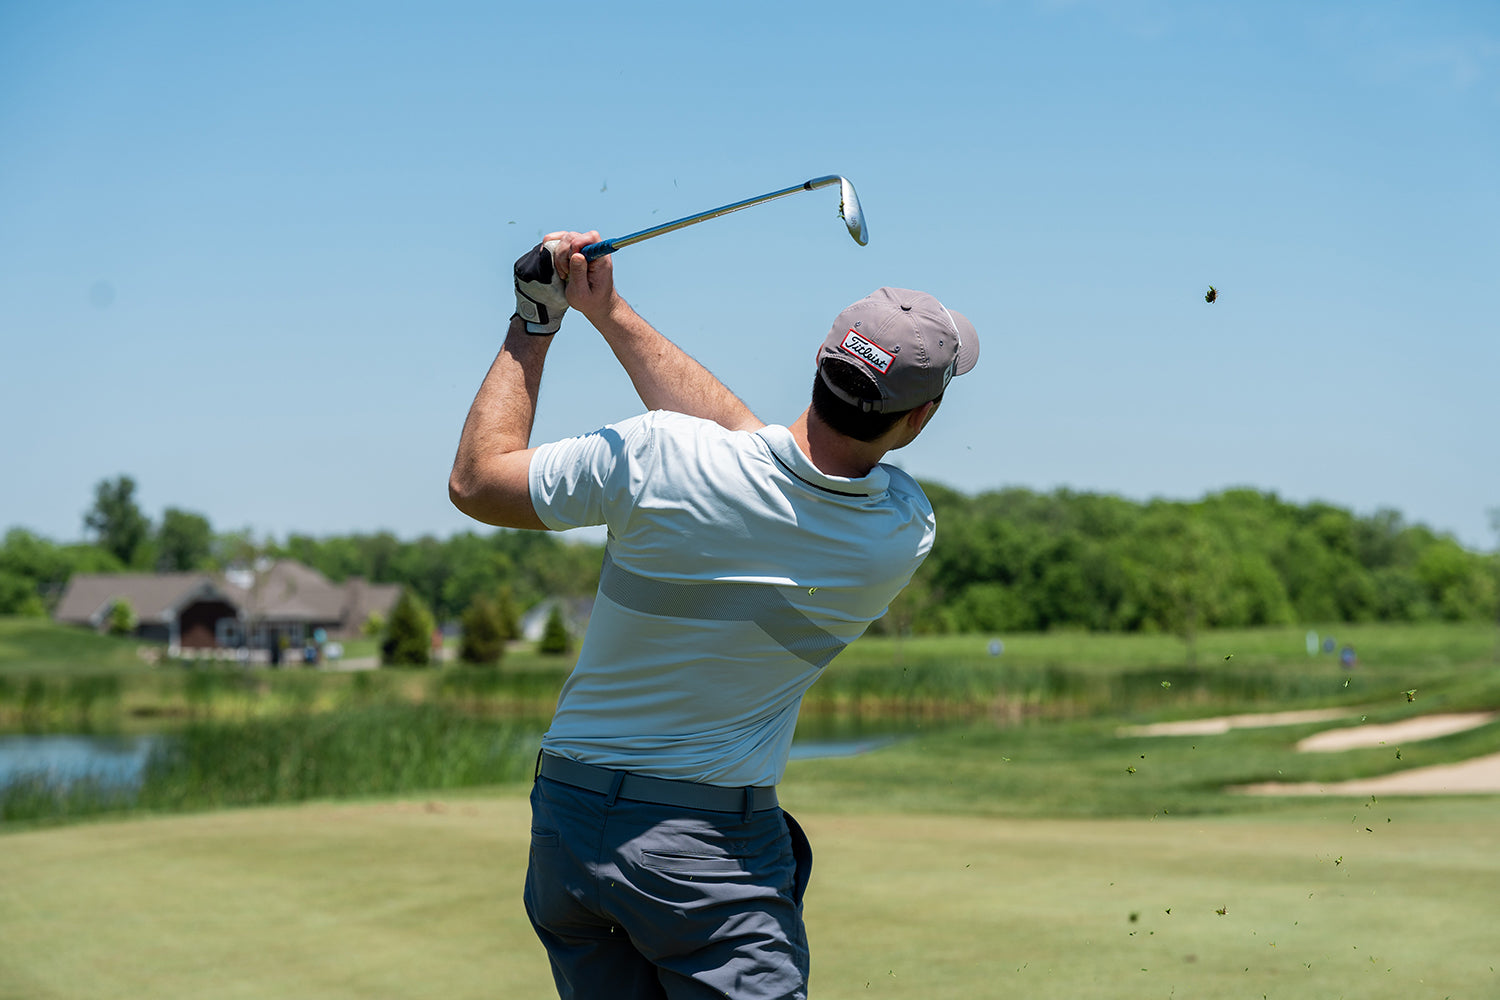 golf player wearing casual golf attire to a golf play hitting a ball on the green